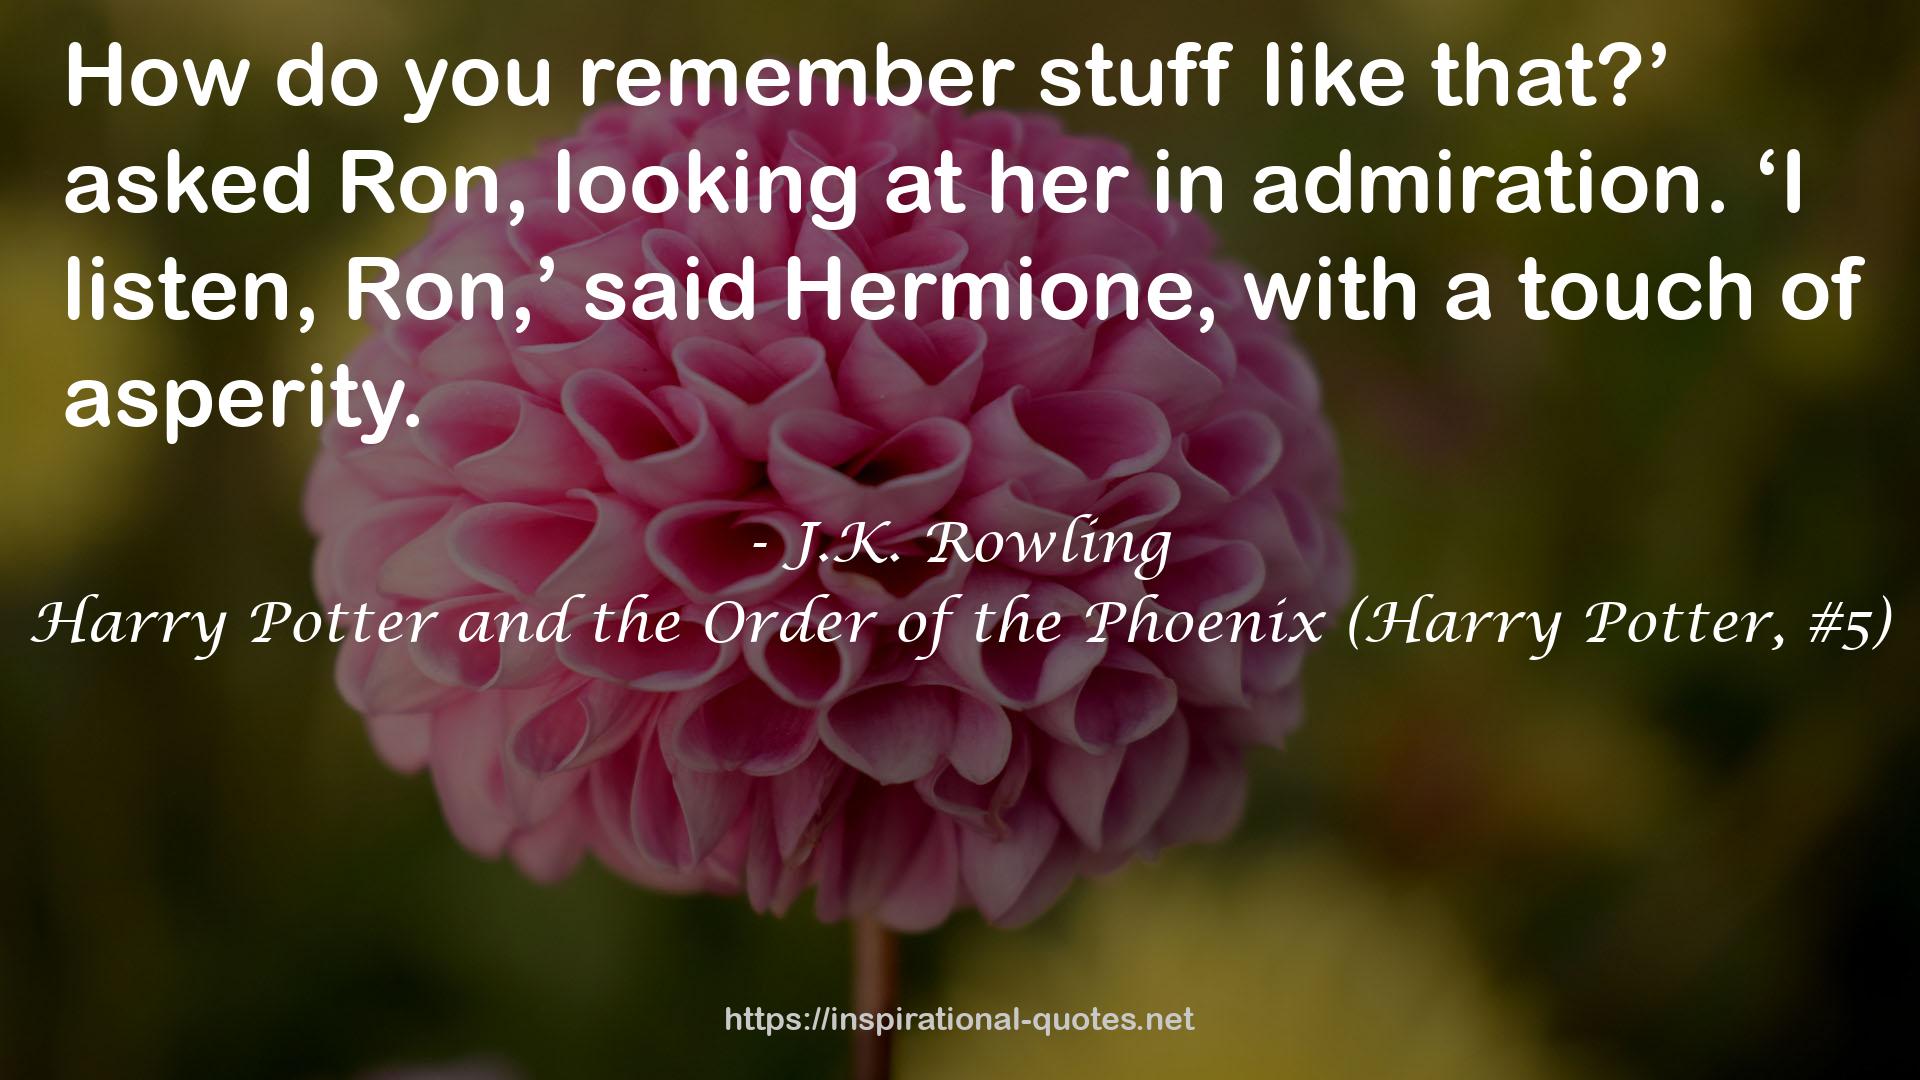 Harry Potter and the Order of the Phoenix (Harry Potter, #5) QUOTES